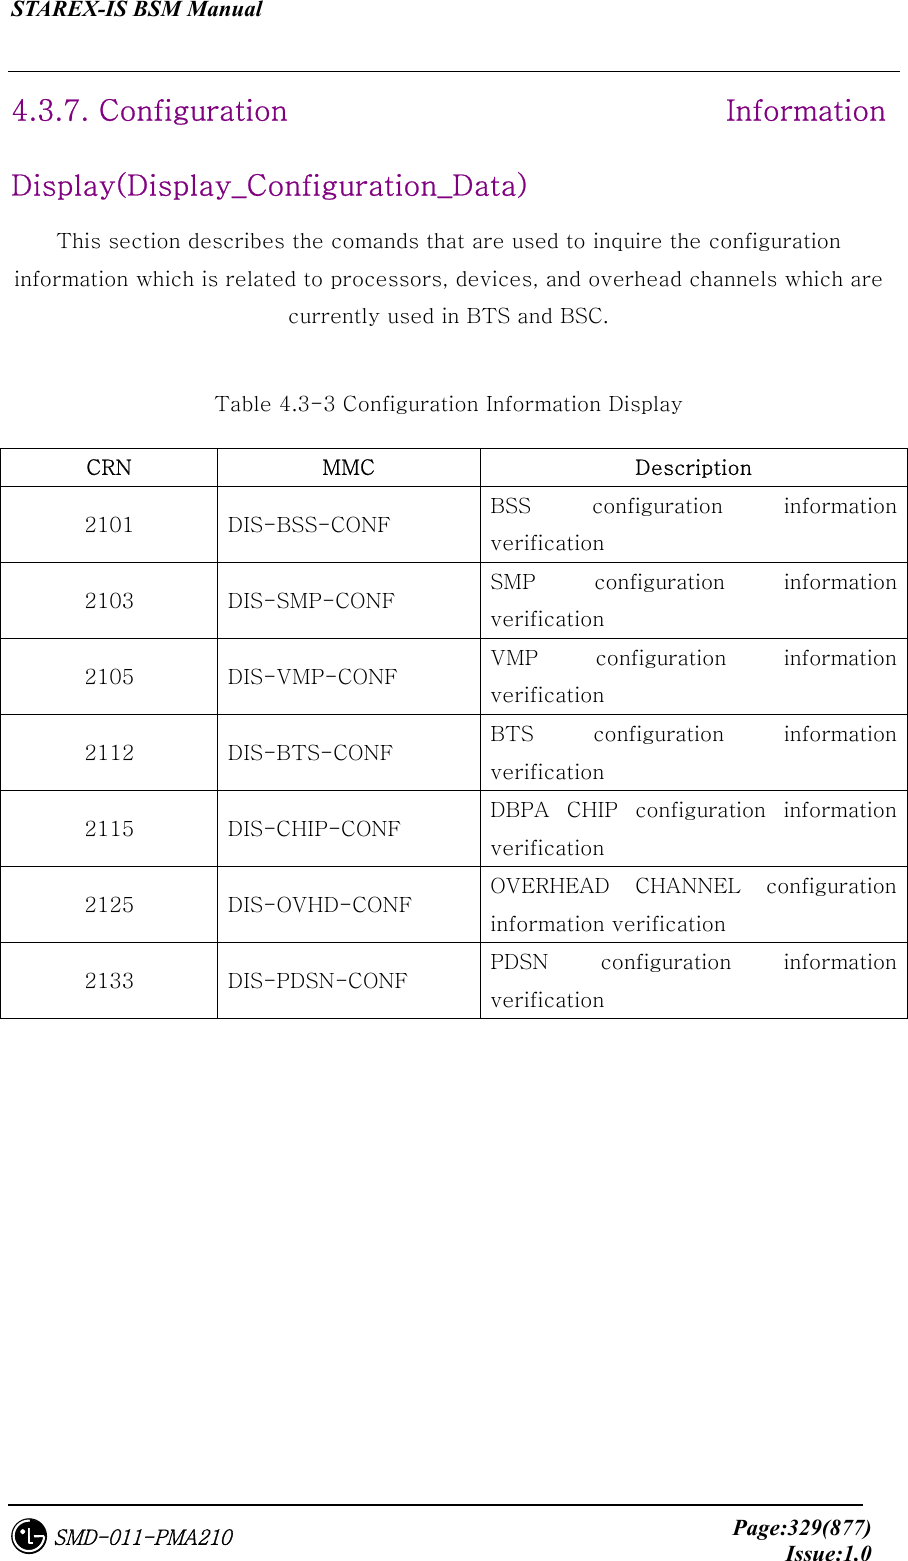 STAREX-IS BSM Manual     Page:329(877)Issue:1.0SMD-011-PMA210 4.3.7. Configuration  Information Display(Display_Configuration_Data) This section describes the comands that are used to inquire the configuration information which is related to processors, devices, and overhead channels which are currently used in BTS and BSC.      Table 4.3-3 Configuration Information Display CRN  MMC  Description 2101  DIS-BSS-CONF  BSS  configuration  information verification   2103  DIS-SMP-CONF  SMP  configuration  information verification 2105  DIS-VMP-CONF  VMP  configuration  information verification 2112  DIS-BTS-CONF  BTS  configuration  information verification 2115  DIS-CHIP-CONF  DBPA  CHIP  configuration  information verification 2125  DIS-OVHD-CONF  OVERHEAD  CHANNEL  configuration information verification 2133  DIS-PDSN-CONF  PDSN  configuration  information verification   